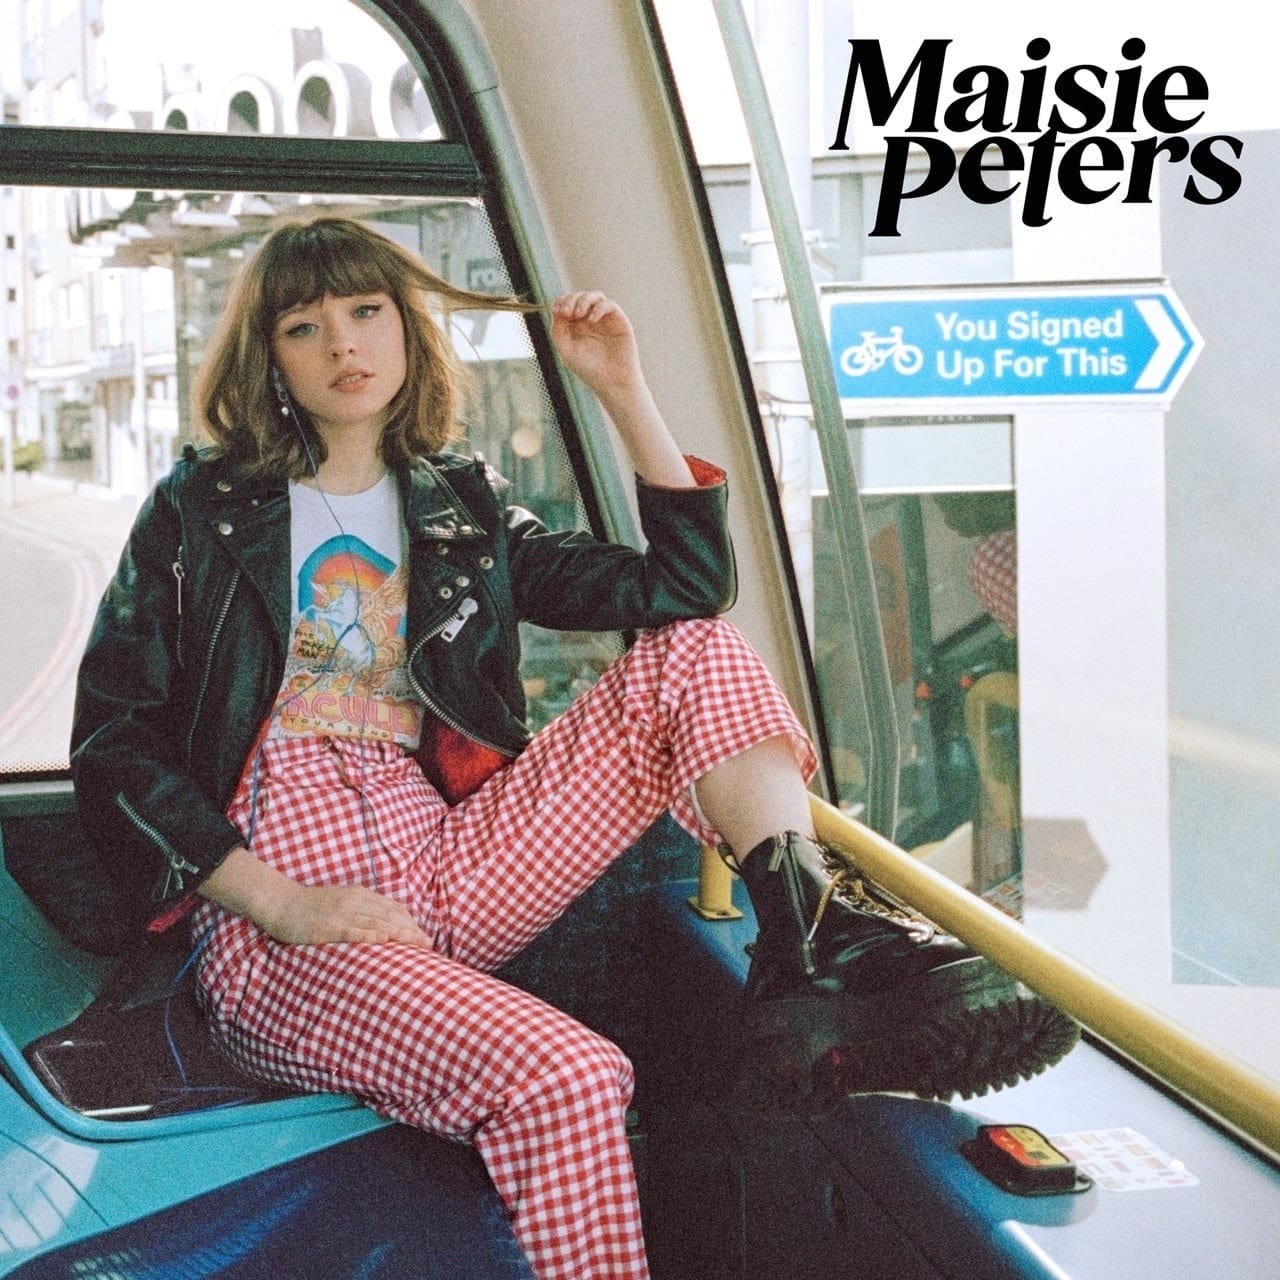 Maisie Peters - You Signed Up For This (2021) - Vinyl